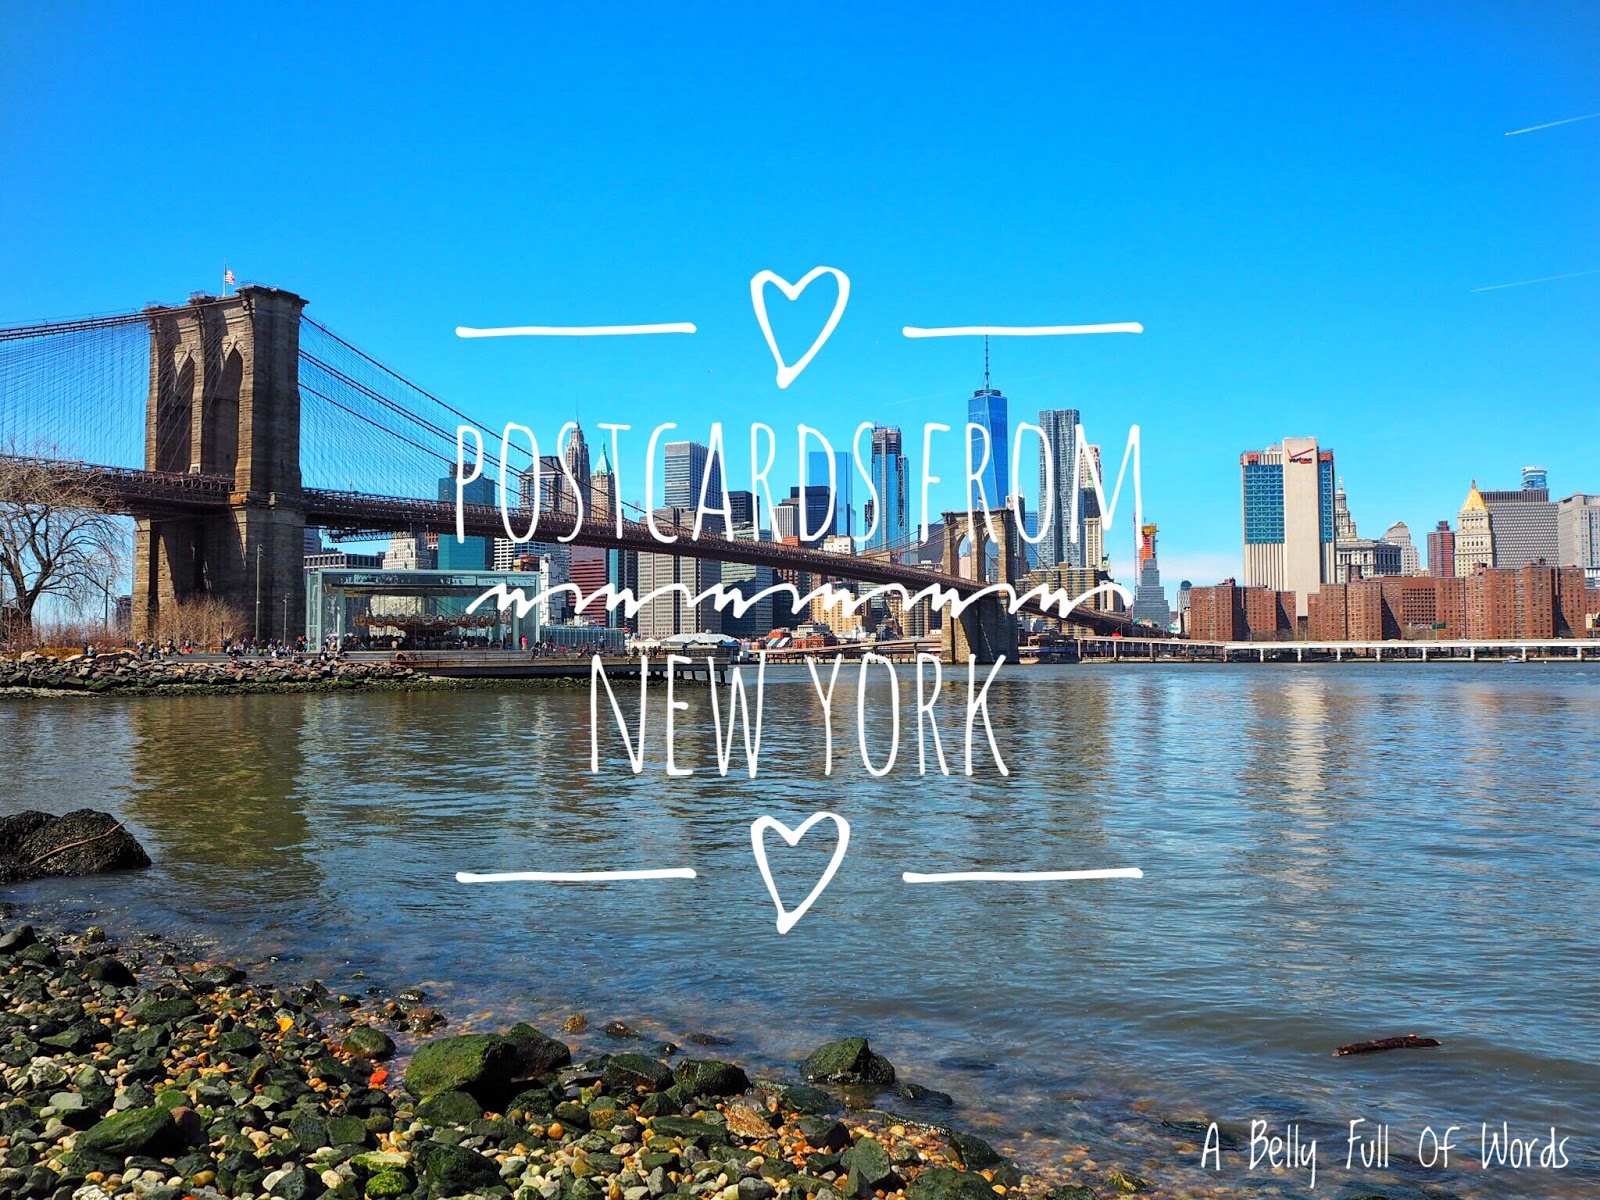 Video: Postcards from New York